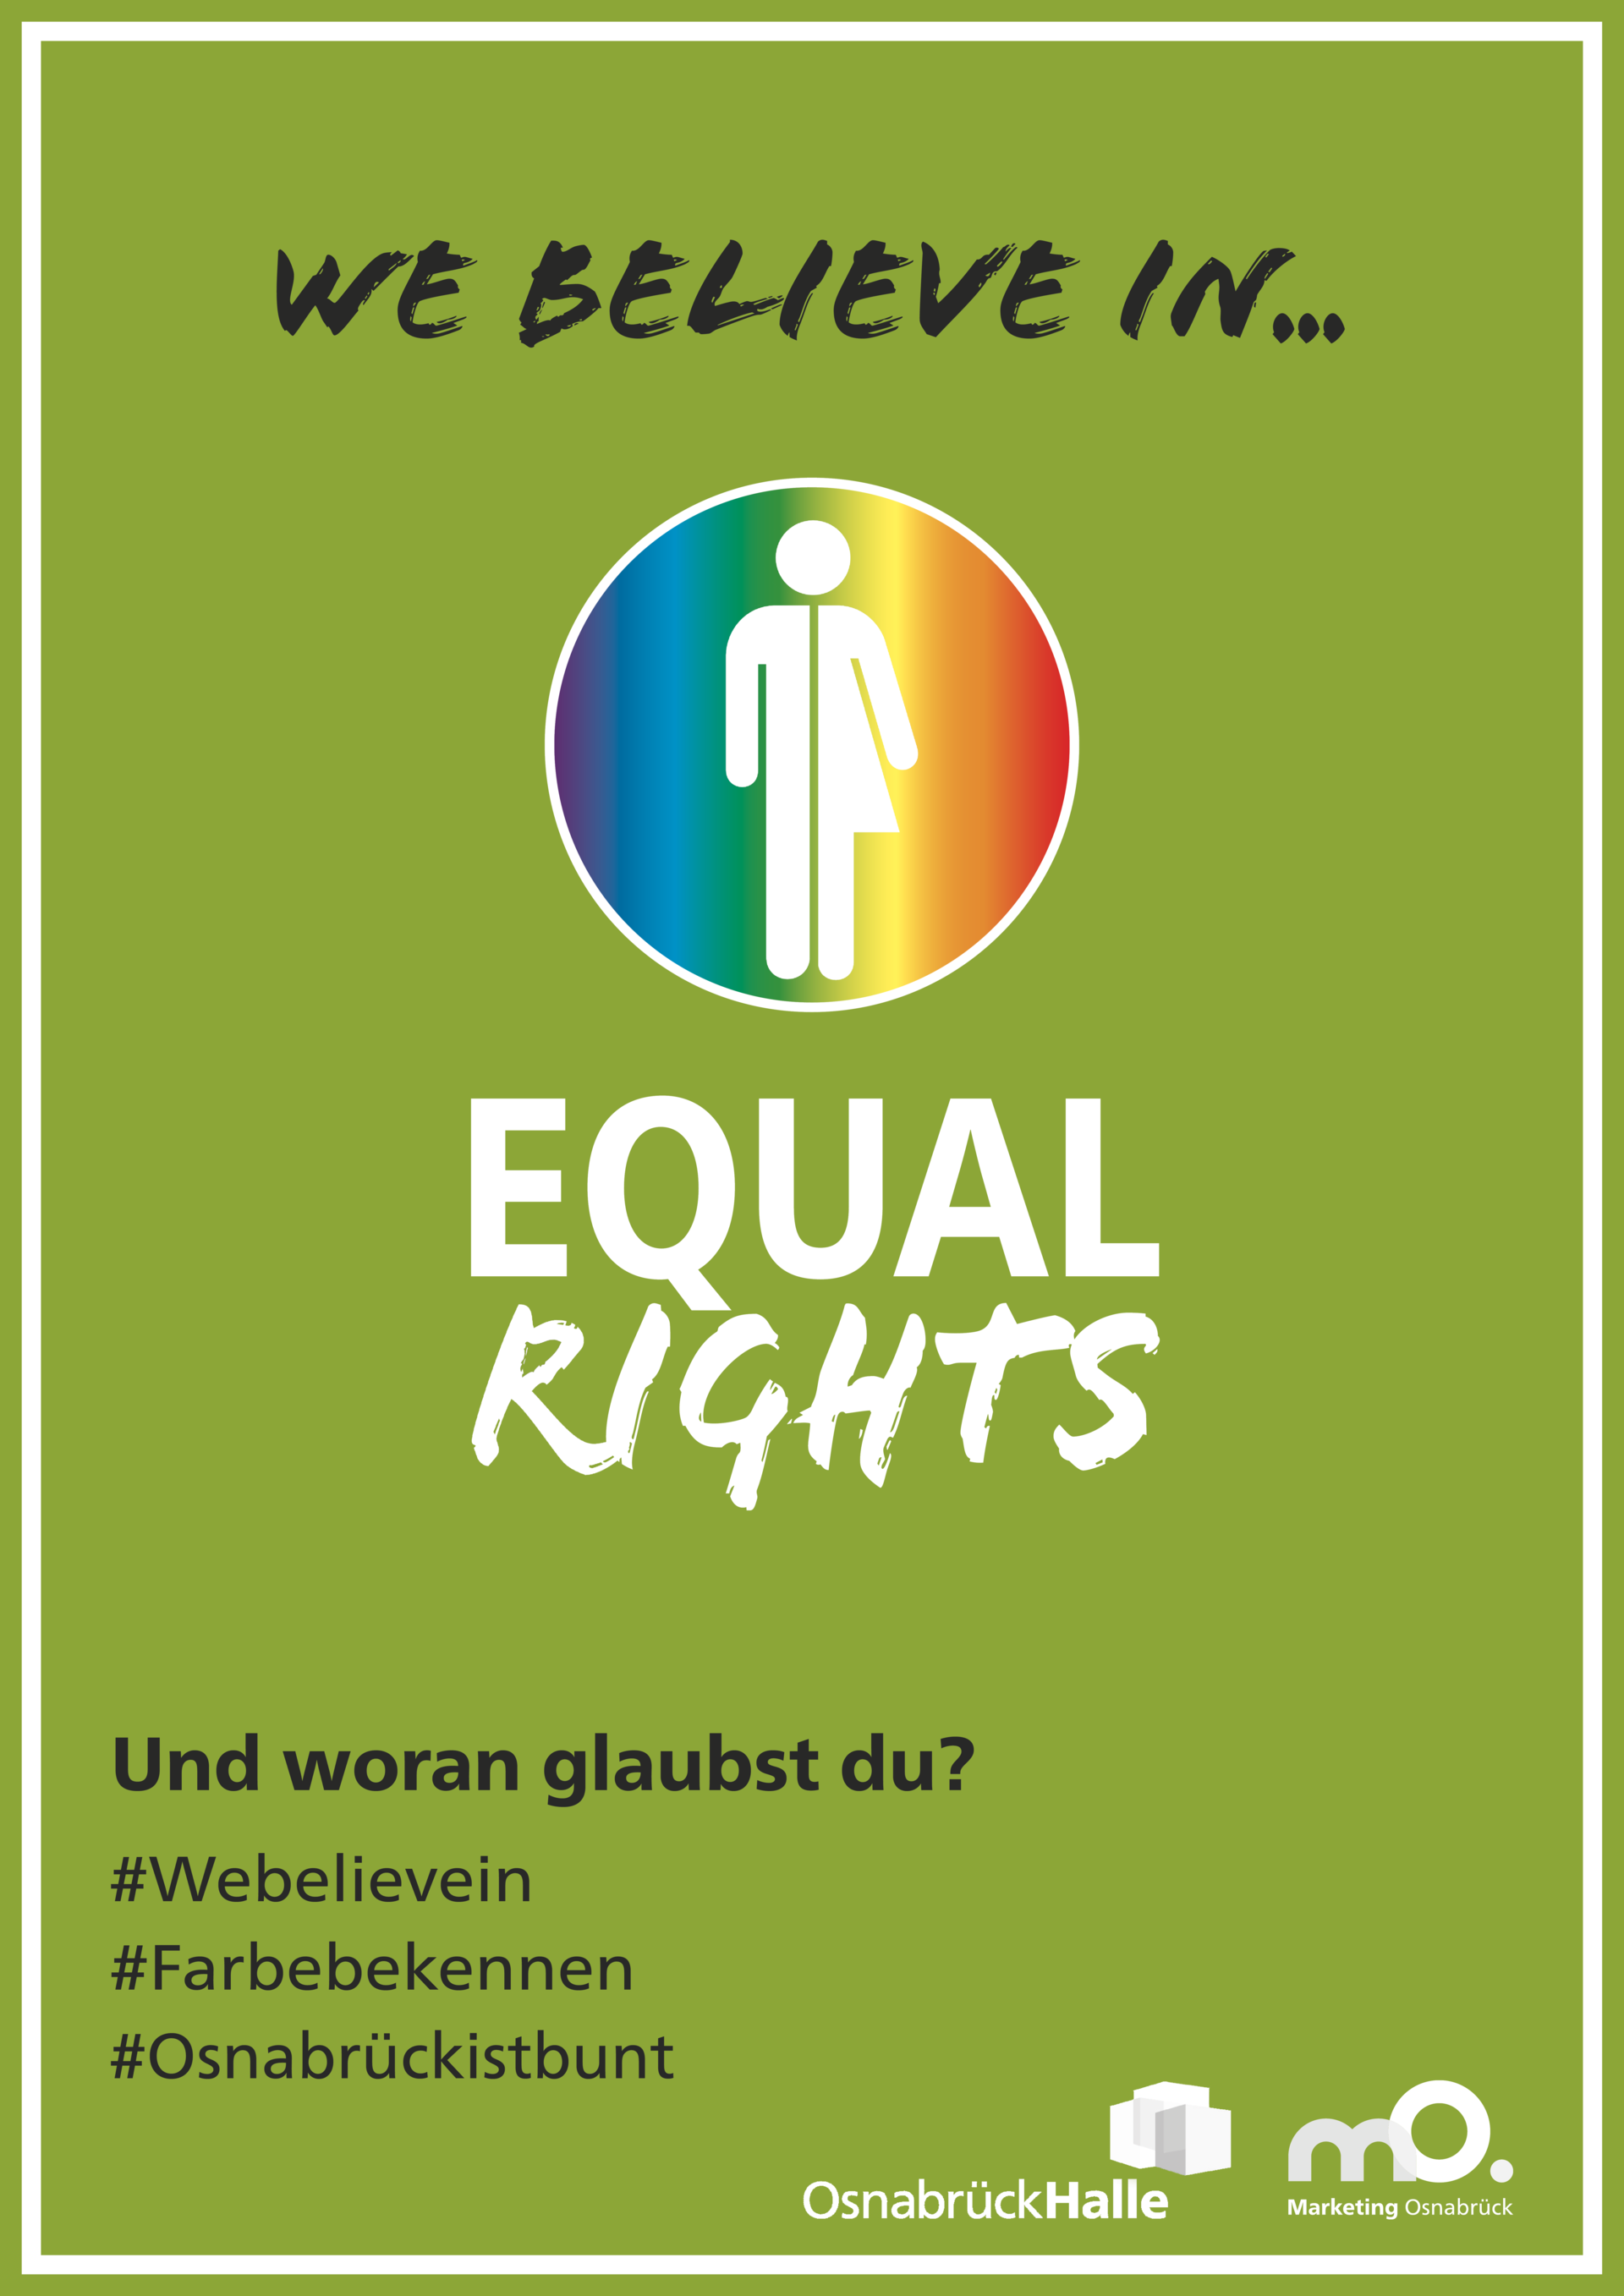 We believe in equal rights